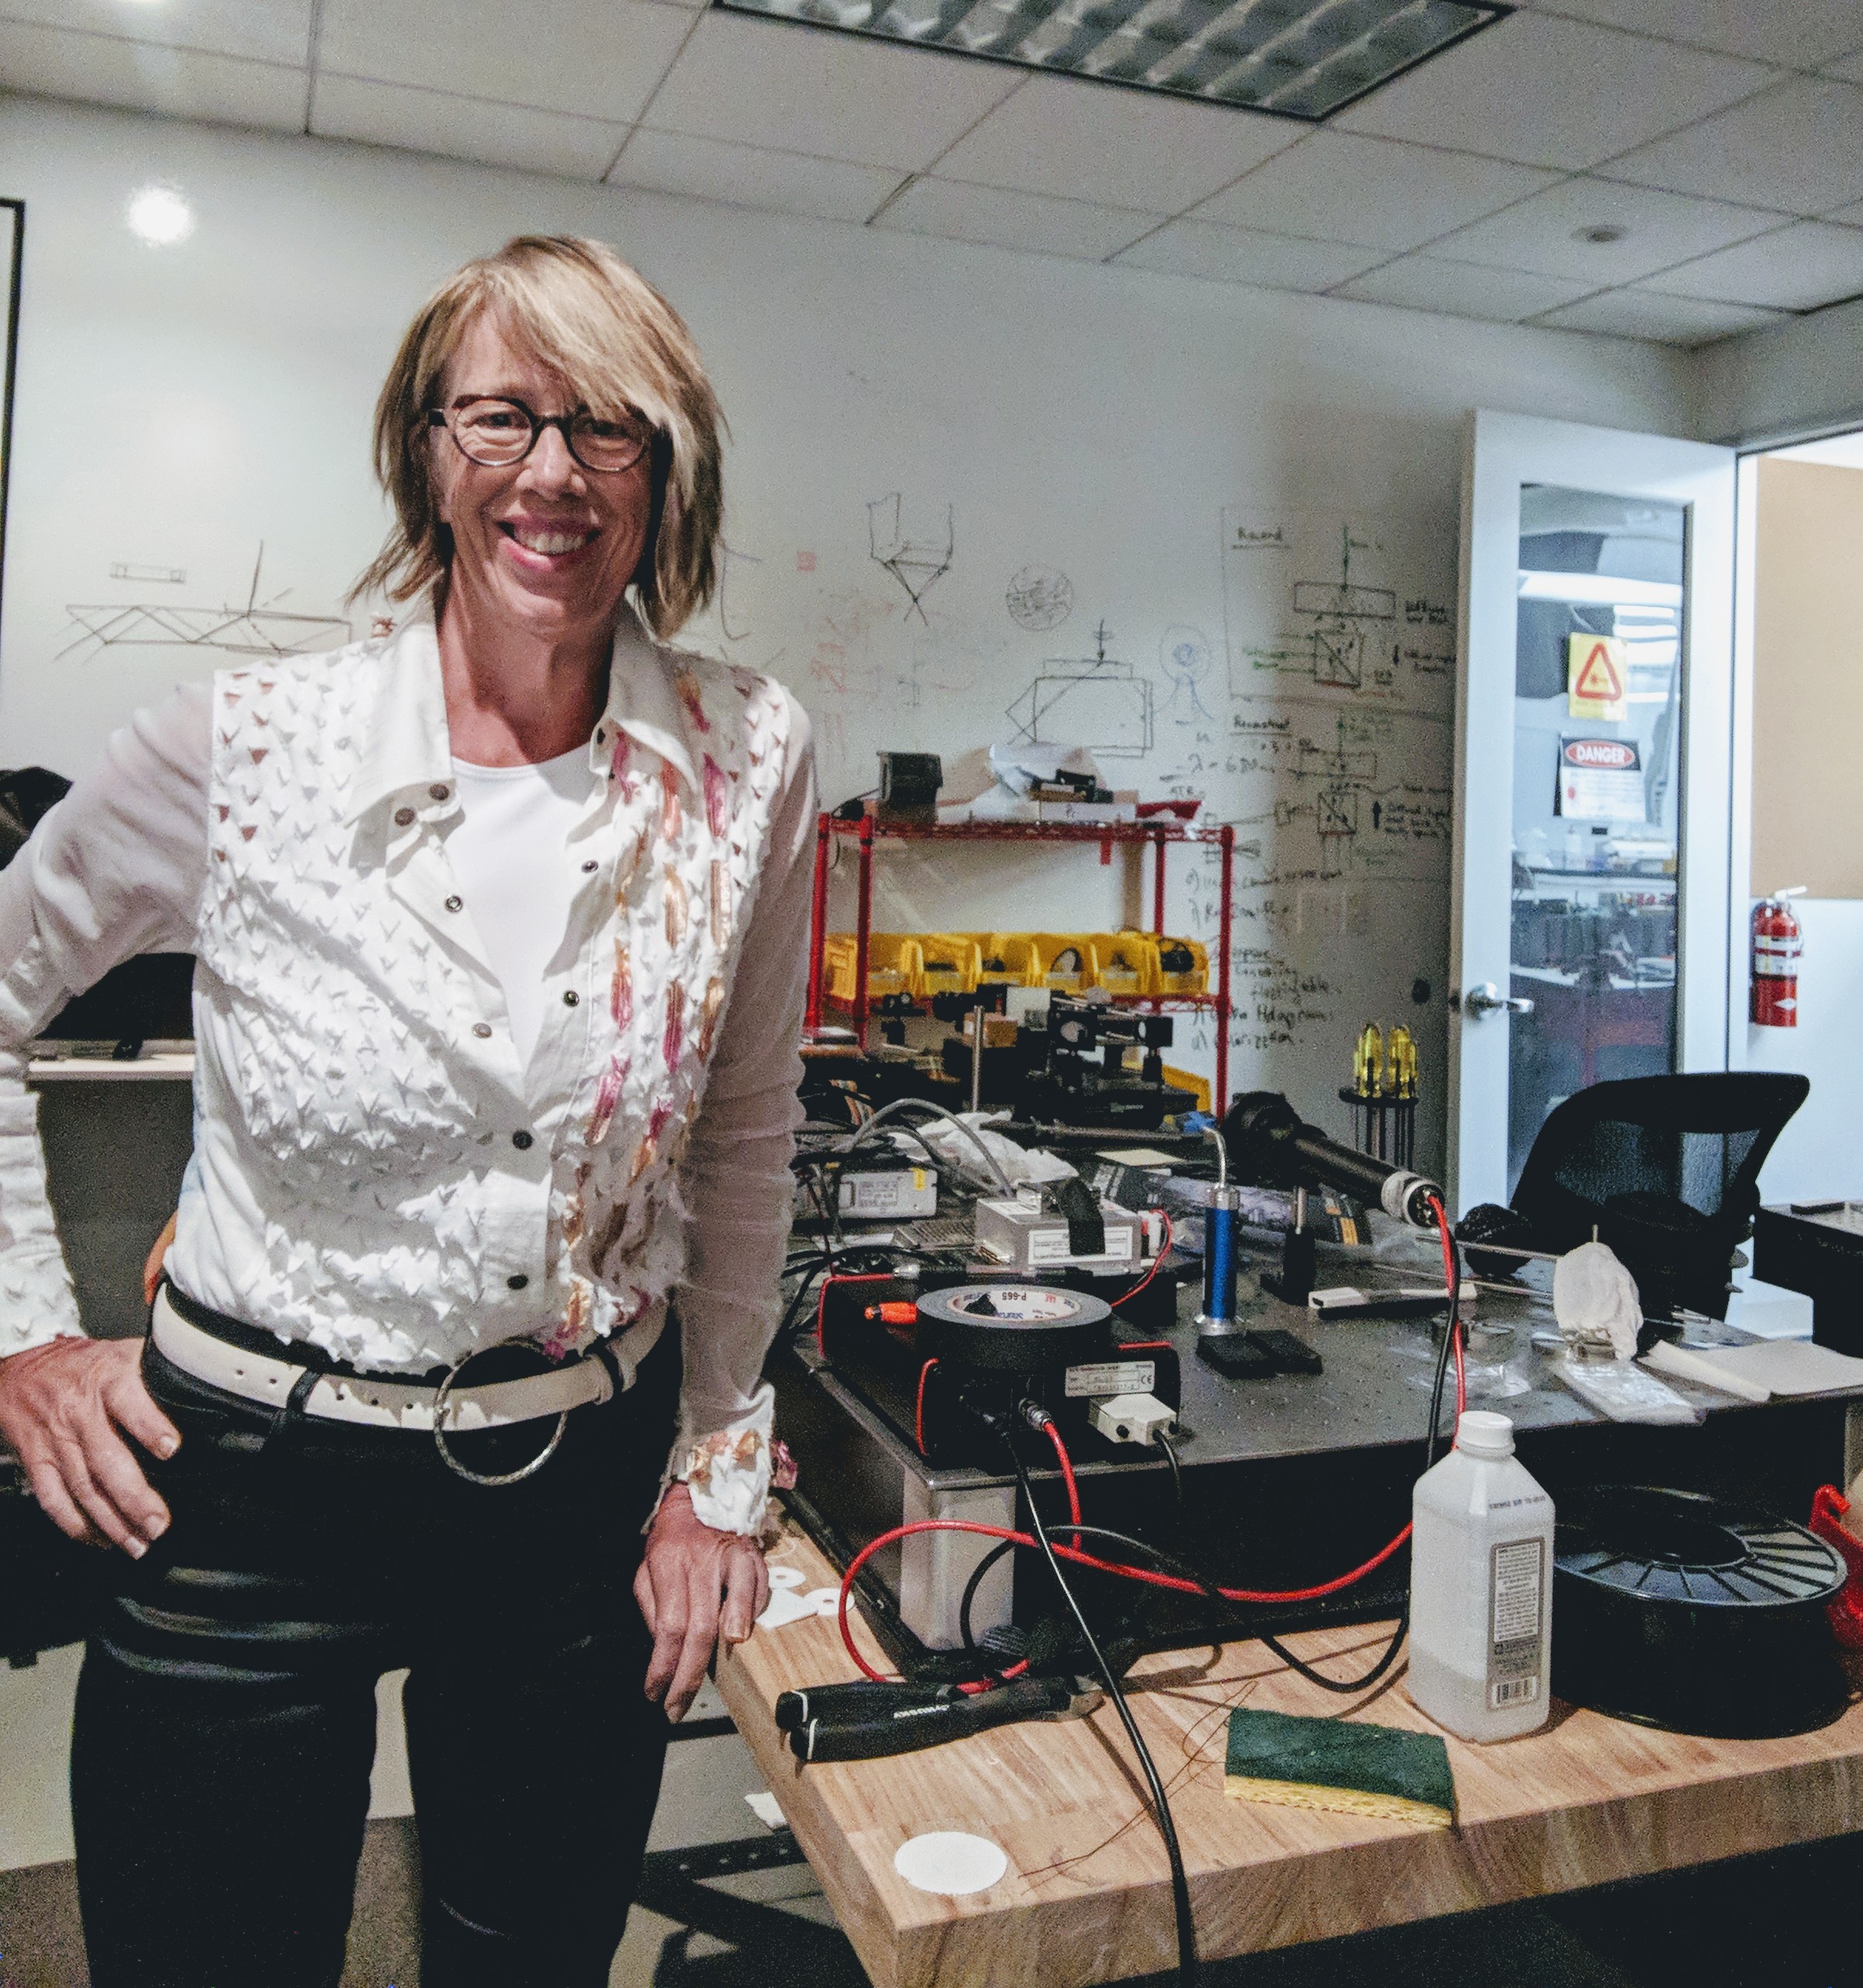 Mary Lou Jepsen working on an optical system in her laboratory.